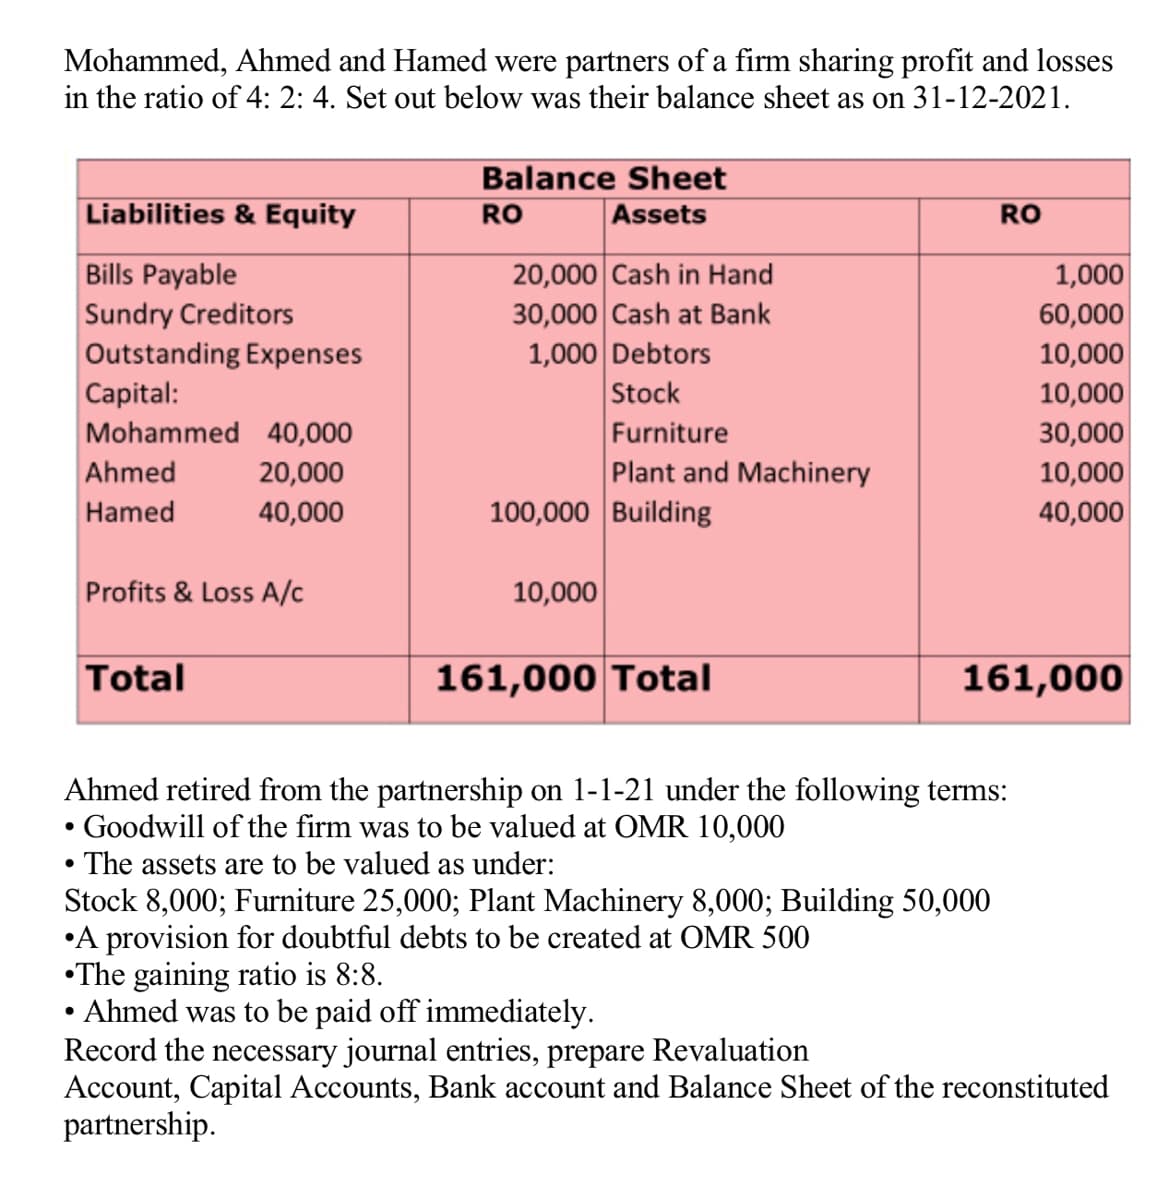 Mohammed, Ahmed and Hamed were partners of a firm sharing profit and losses
in the ratio of 4: 2: 4. Set out below was their balance sheet as on 31-12-2021.
Balance Sheet
Liabilities & Equity
RO
Assets
RO
Bills Payable
20,000 Cash in Hand
Sundry Creditors
30,000 Cash at Bank
Outstanding Expenses
1,000 Debtors
Capital:
Stock
Mohammed 40,000
Furniture
Ahmed
20,000
Plant and Machinery
Hamed
40,000
100,000 Building
Profits & Loss A/c
10,000
Total
161,000 Total
Ahmed retired from the partnership on 1-1-21 under the following terms:
Goodwill of the firm was to be valued at OMR 10,000
●
The assets are to be valued as under:
Stock 8,000; Furniture 25,000; Plant Machinery 8,000; Building 50,000
A provision for doubtful debts to be created at OMR 500
The gaining ratio is 8:8.
• Ahmed was to be paid off immediately.
Record the necessary journal entries, prepare Revaluation
Account, Capital Accounts, Bank account and Balance Sheet of the reconstituted
partnership.
1,000
60,000
10,000
10,000
30,000
10,000
40,000
161,000